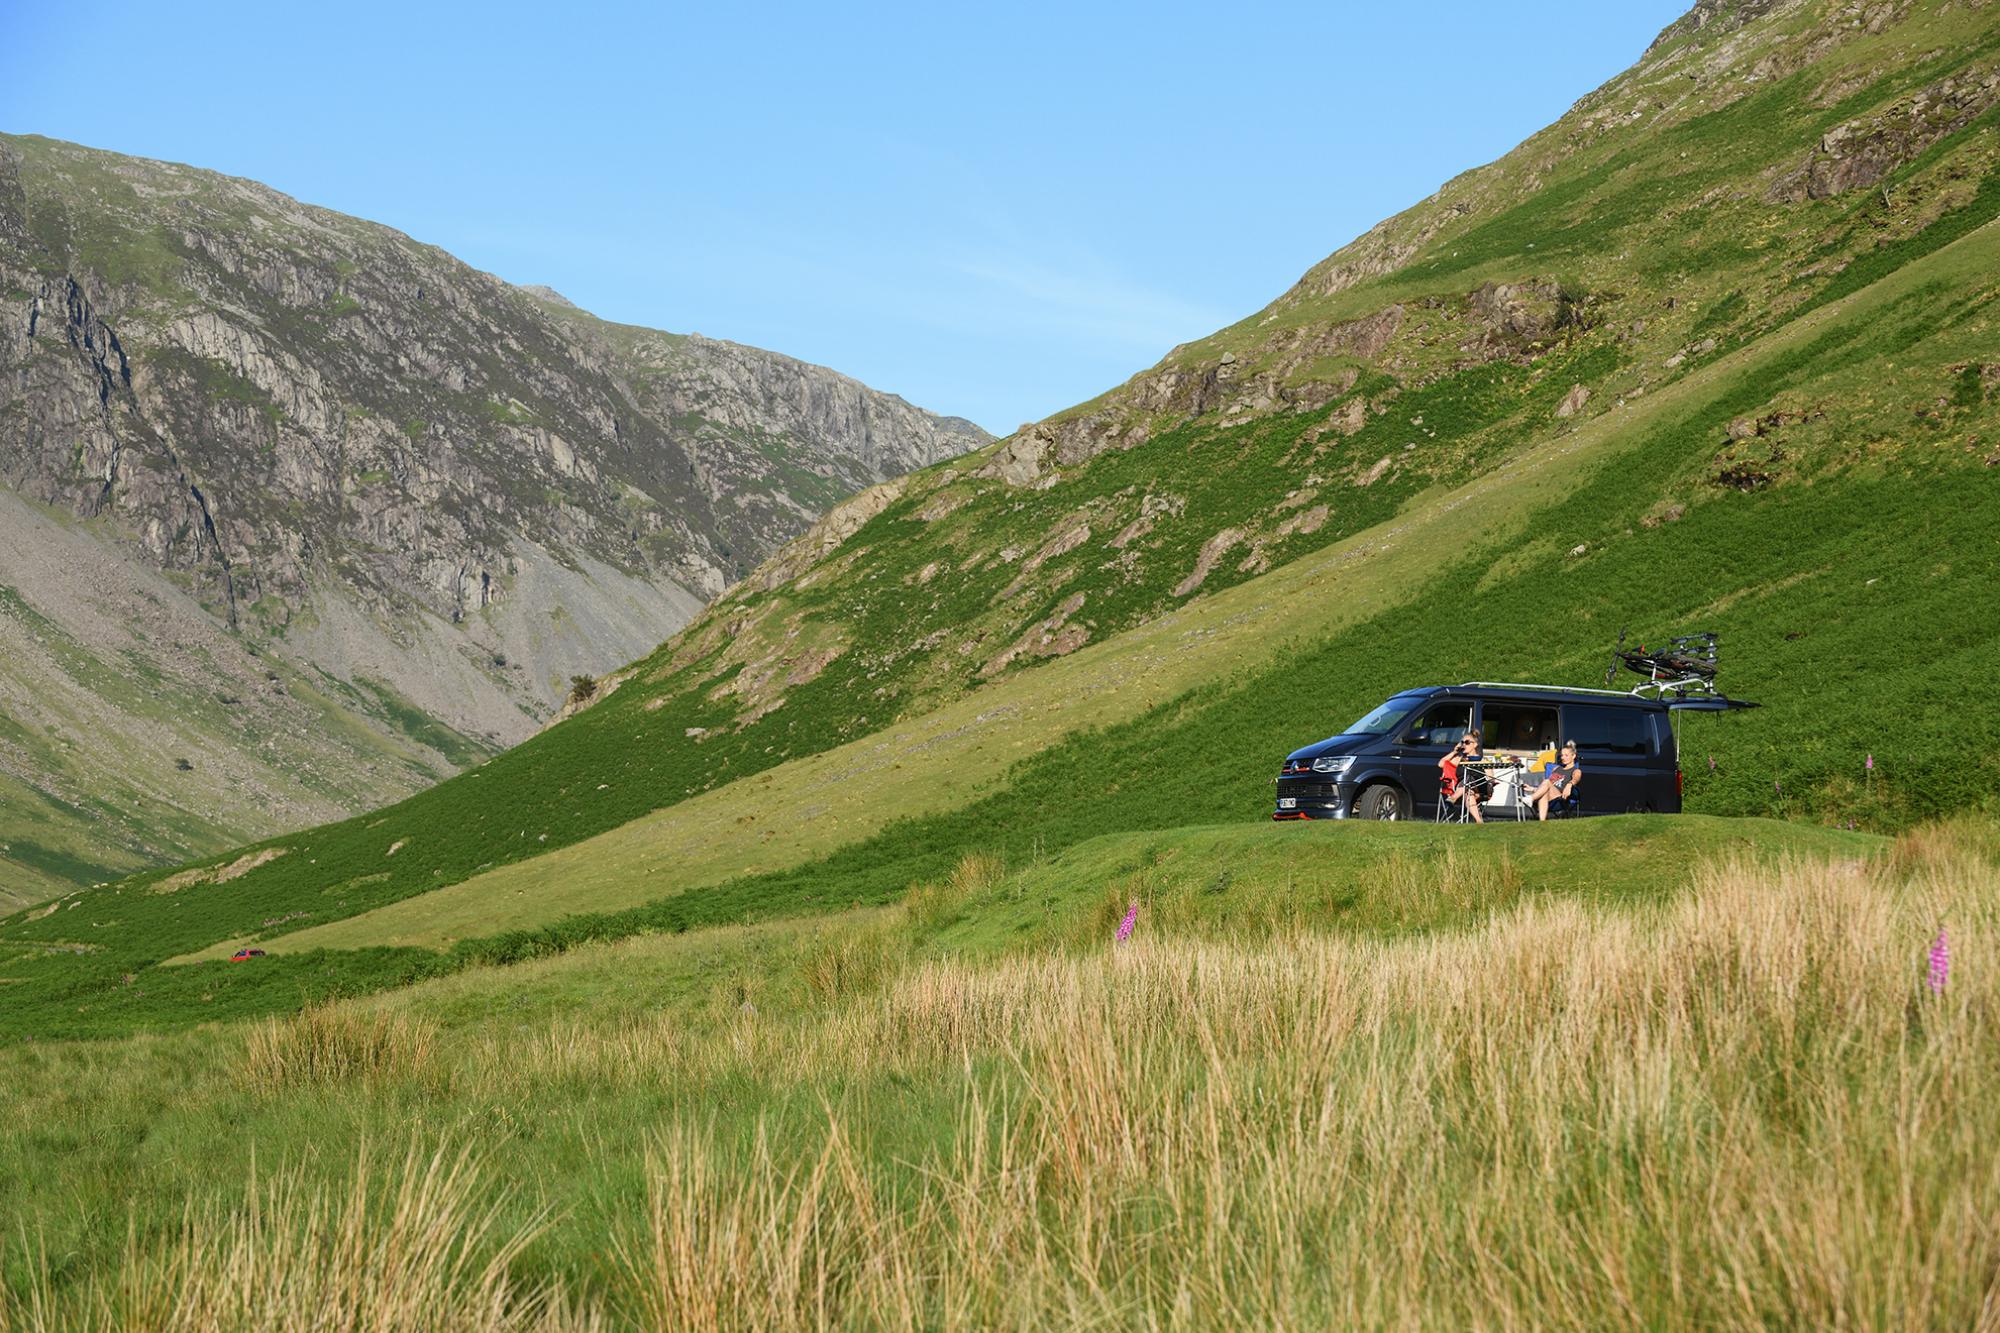 Campervan hire in the Lake District | Motorhome rental in the Lake District National Park